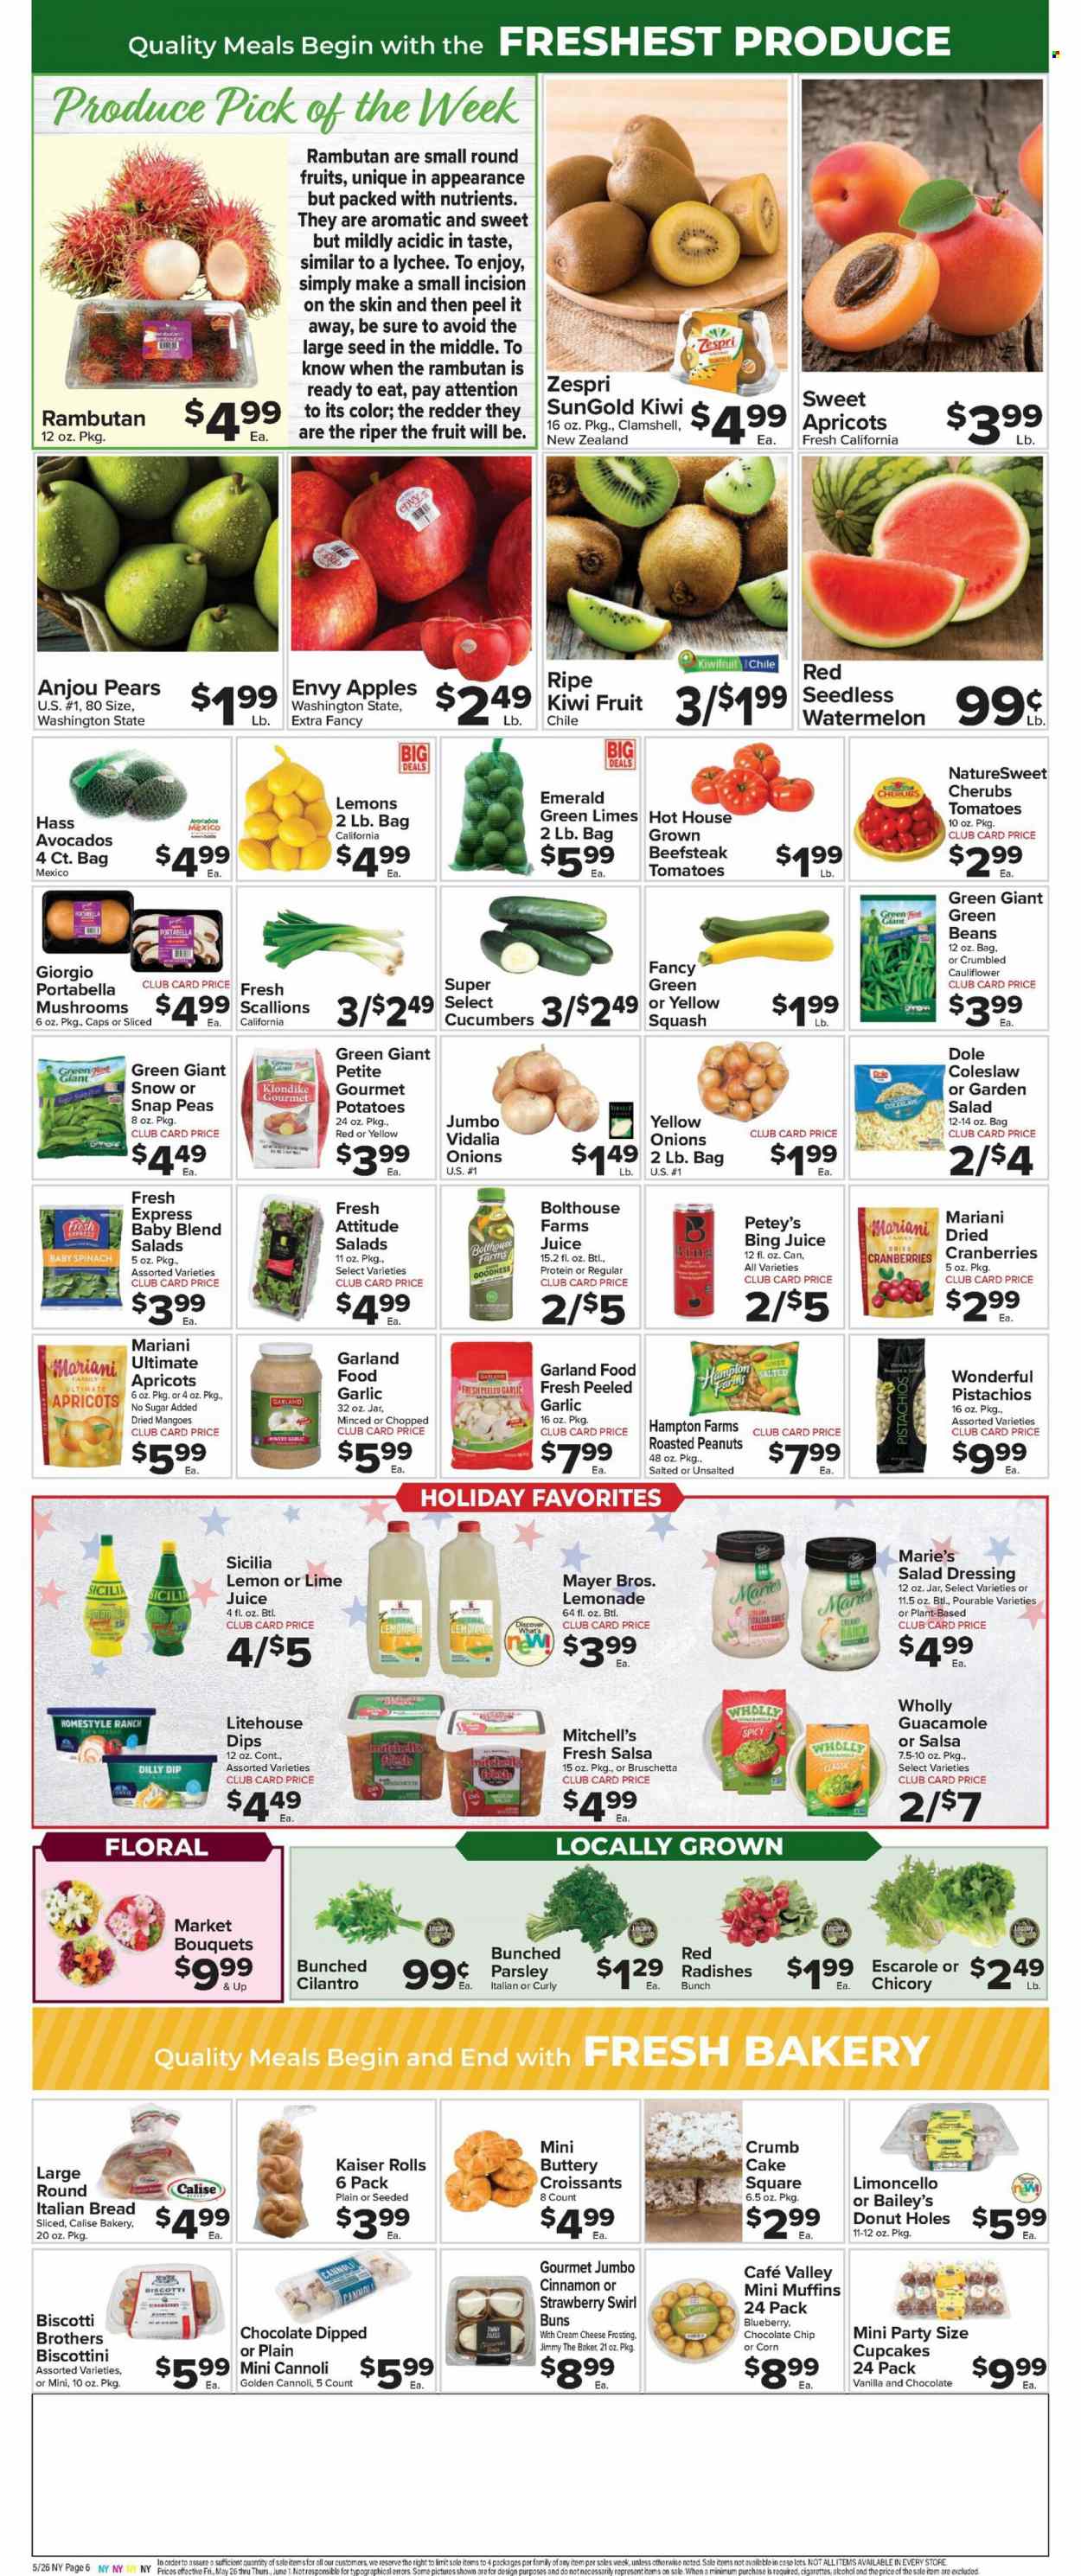 thumbnail - Foodtown Flyer - 05/26/2023 - 06/01/2023 - Sales products - bread, cake, croissant, buns, cupcake, donut holes, muffin, beans, corn, cucumber, green beans, radishes, tomatoes, potatoes, parsley, peas, onion, Dole, green onion, yellow squash, apples, kiwi, limes, mango, pears, apricots, coleslaw, bruschetta, guacamole, dip, snap peas, biscotti, chocolate chips, cranberries, lychee, cilantro, cinnamon, salad dressing, dressing, salsa, Baileys, roasted peanuts, peanuts, dried fruit, pistachios, lemonade, juice, alcohol, Limoncello, BROTHERS, Sure, bouquet, lemons. Page 8.